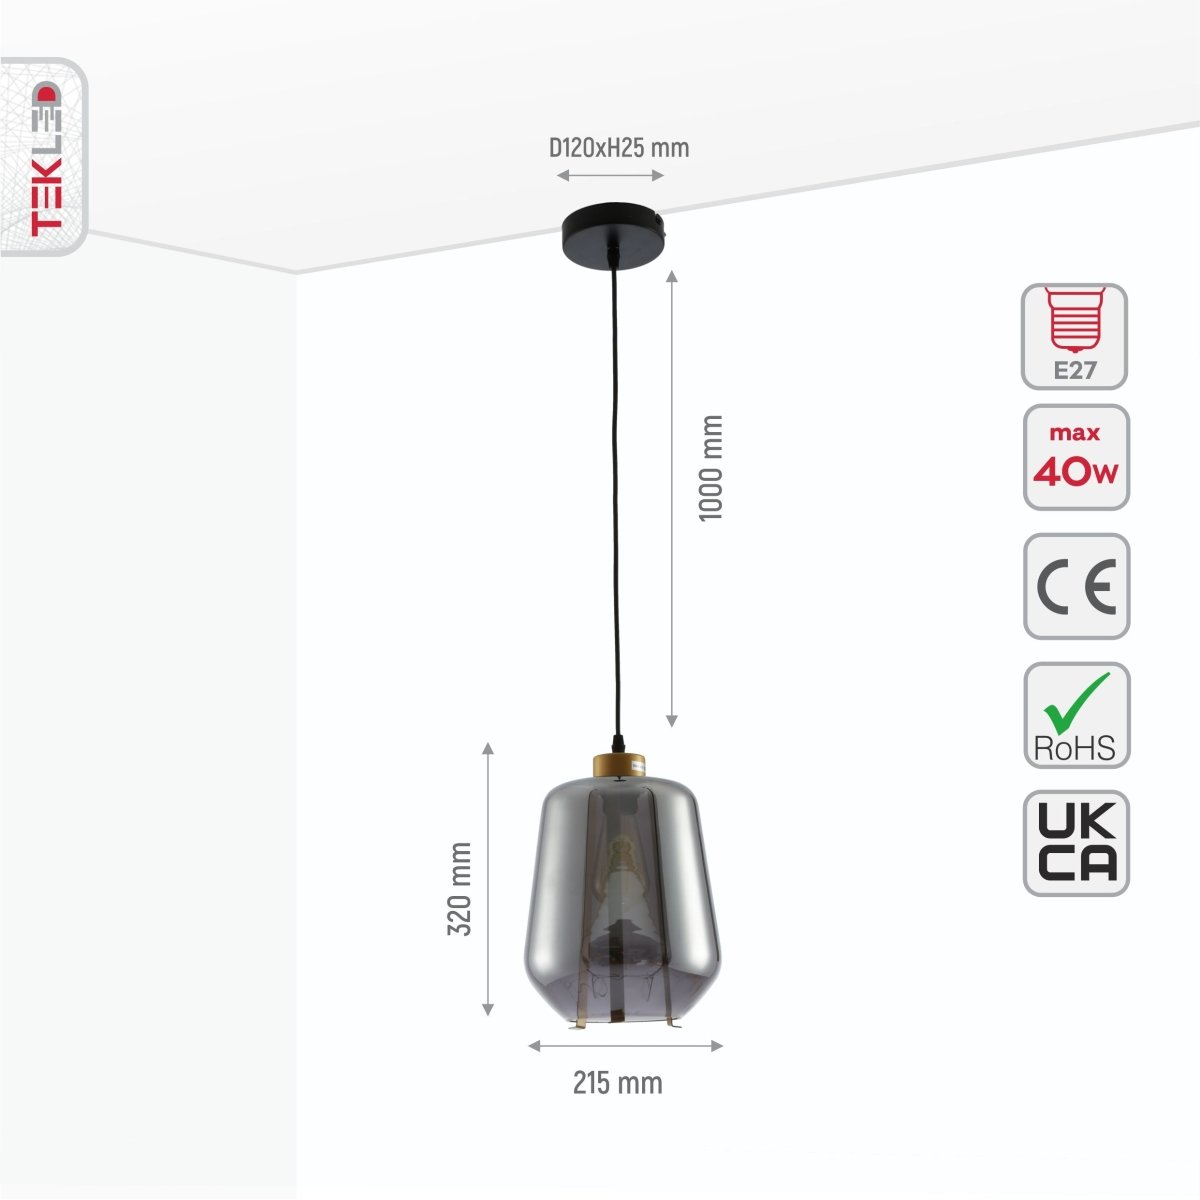 Size and specs of Smoky Glass Schoolhouse Pendant Light with E27 Fitting | TEKLED 159-17348